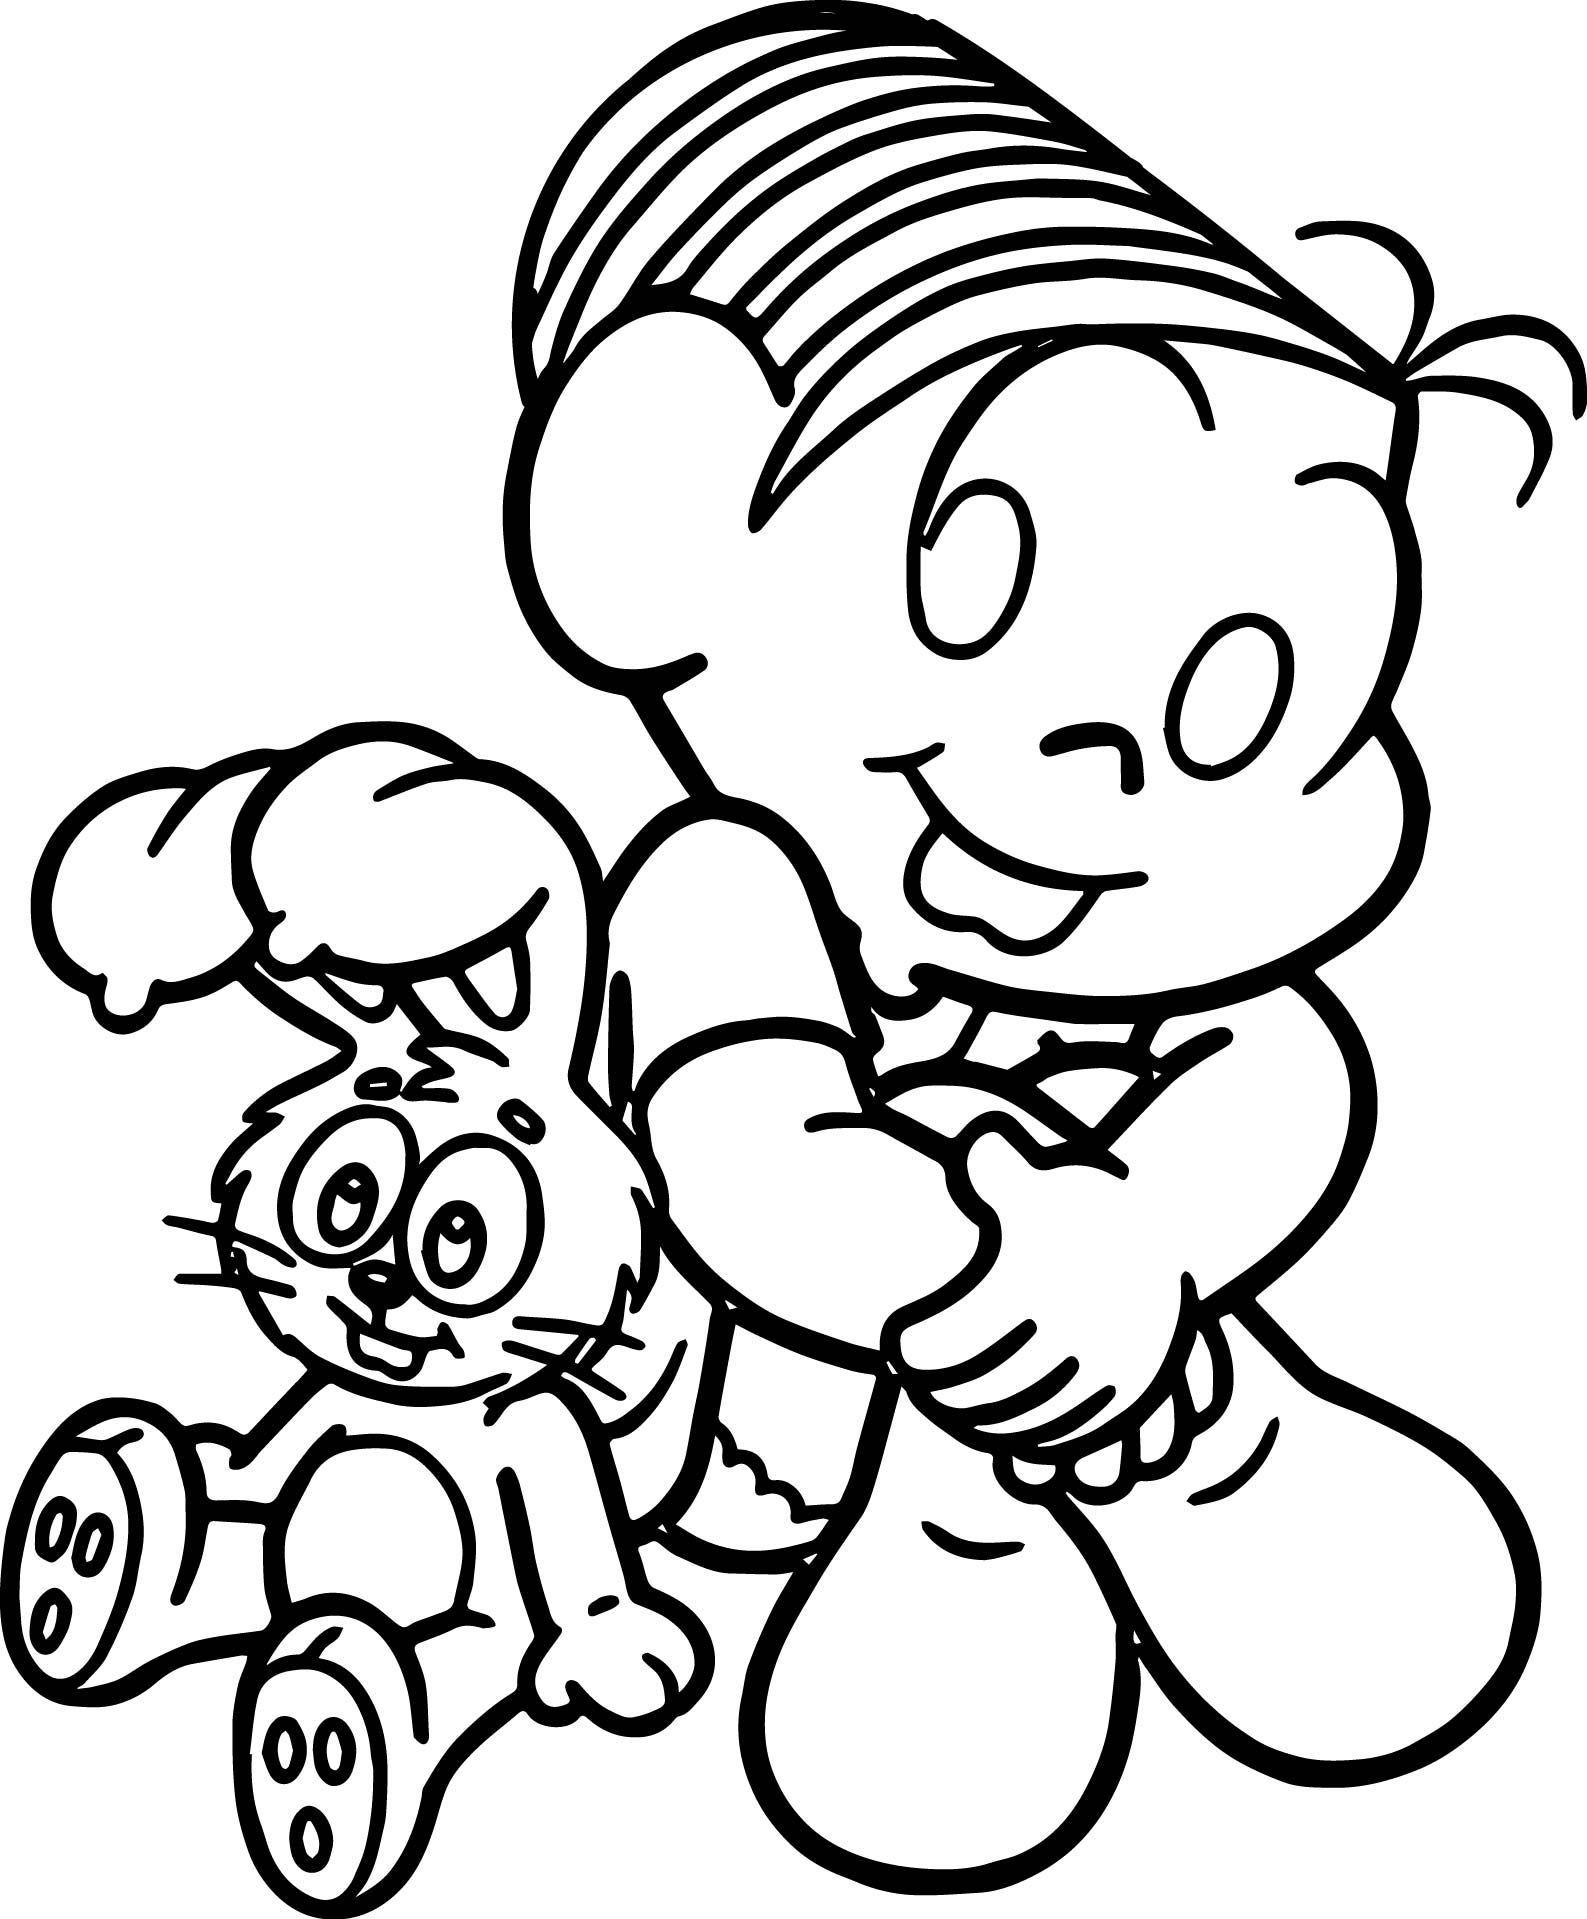 Girl monica and toy bunny cute coloring page